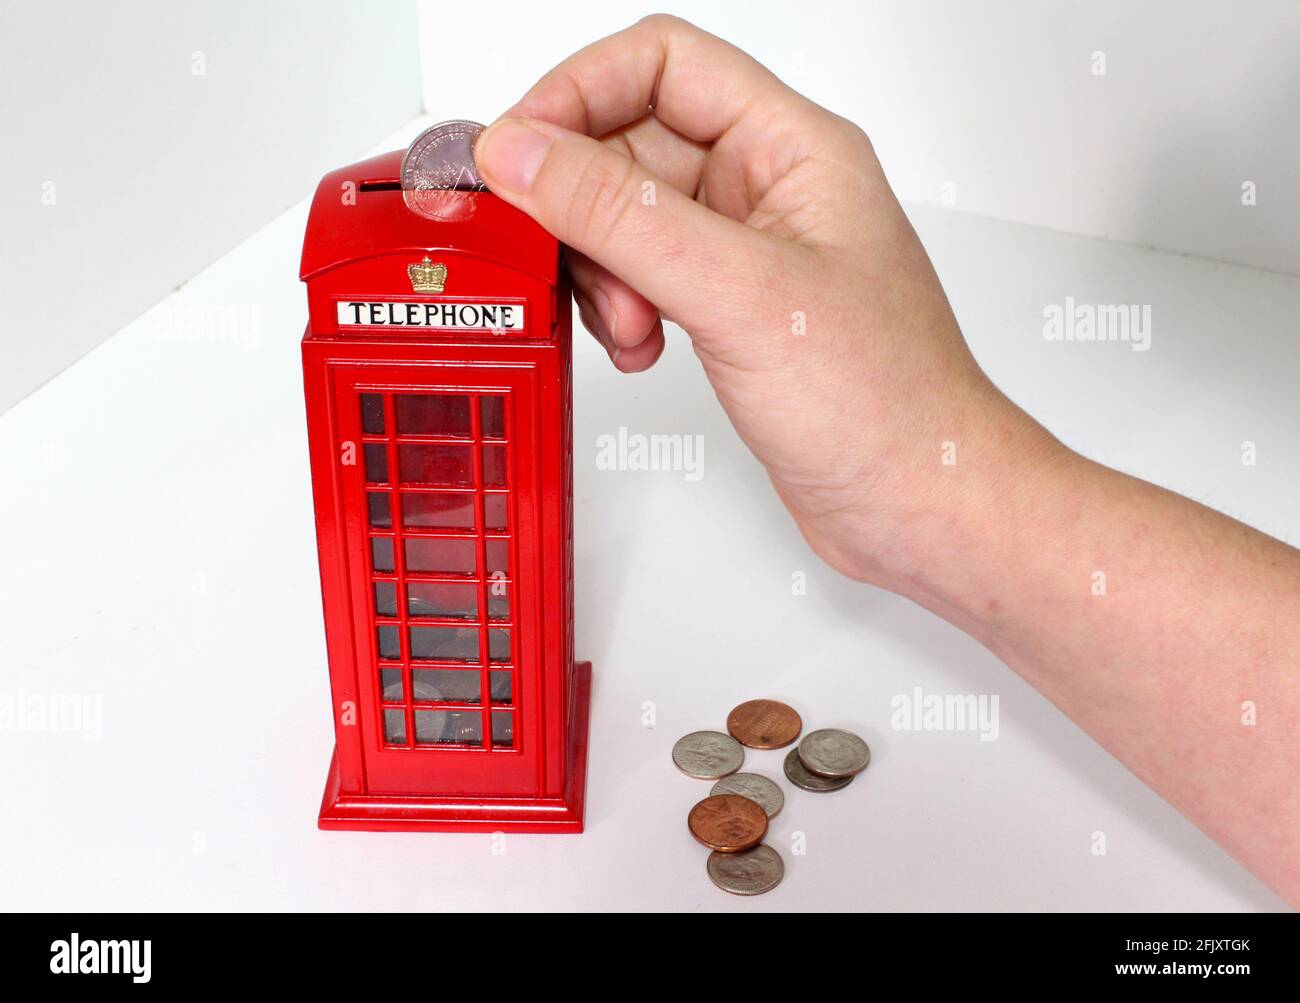 Woman's hand depositing coins into a London Phone Booth Coin Bank. British Red Telephone Booth. Piggy bank. Stock Photo